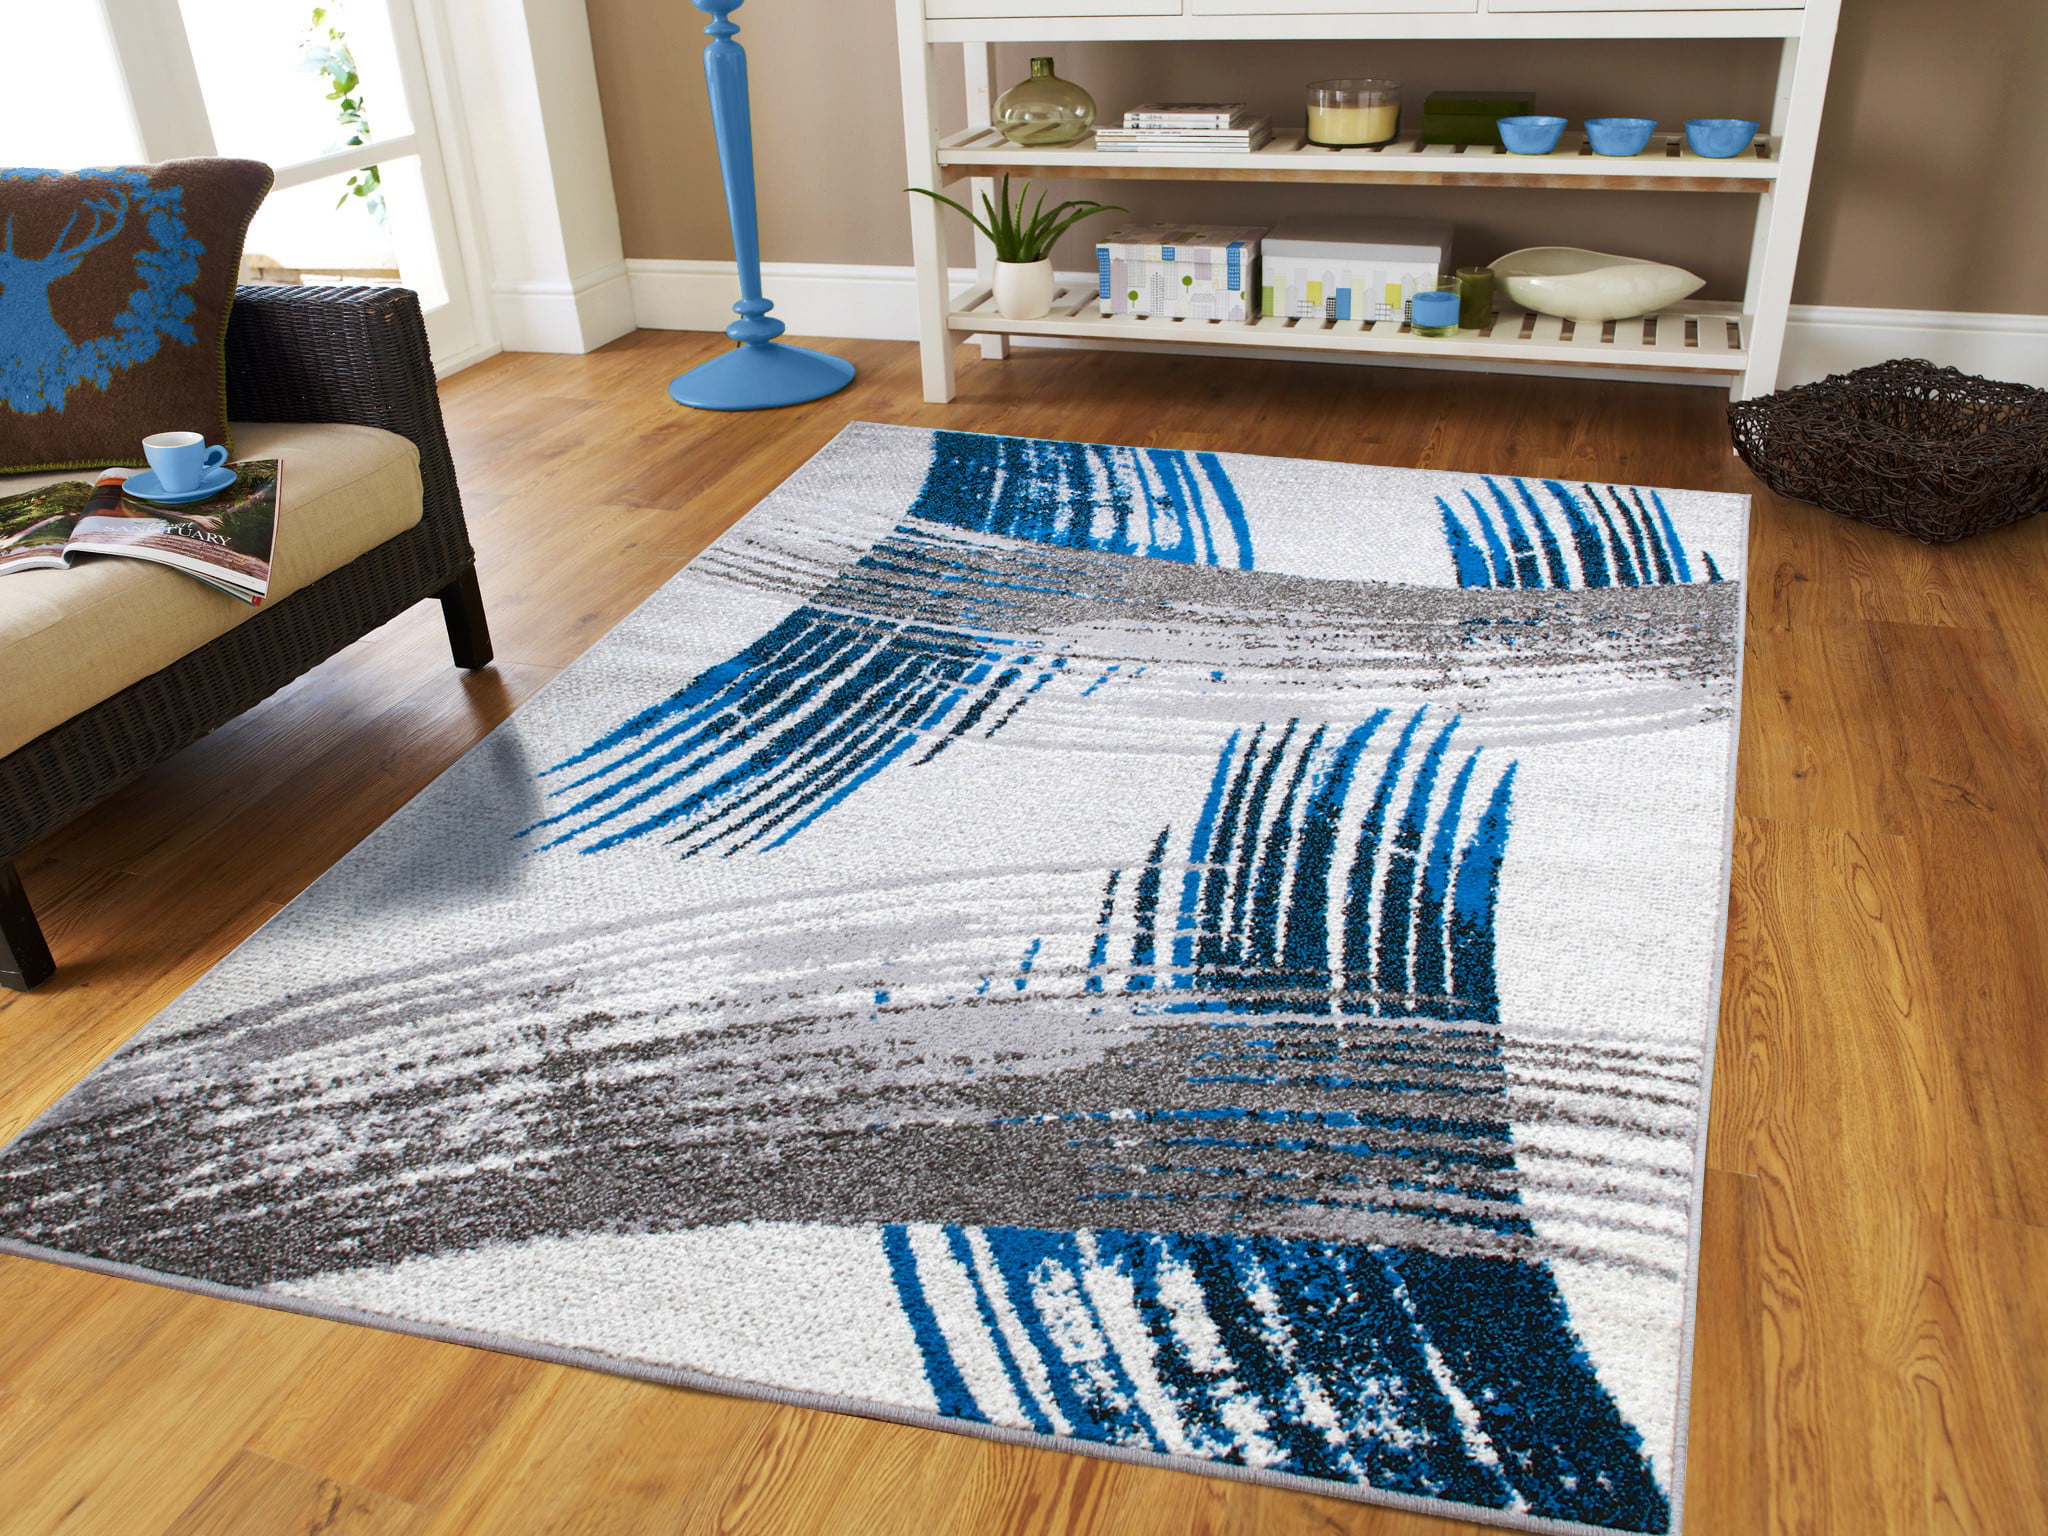 Large Contemporary Area Rugs 8 by 10 Grey Blue Green Area Rugs on Clearance 8x10 Rugs for Living